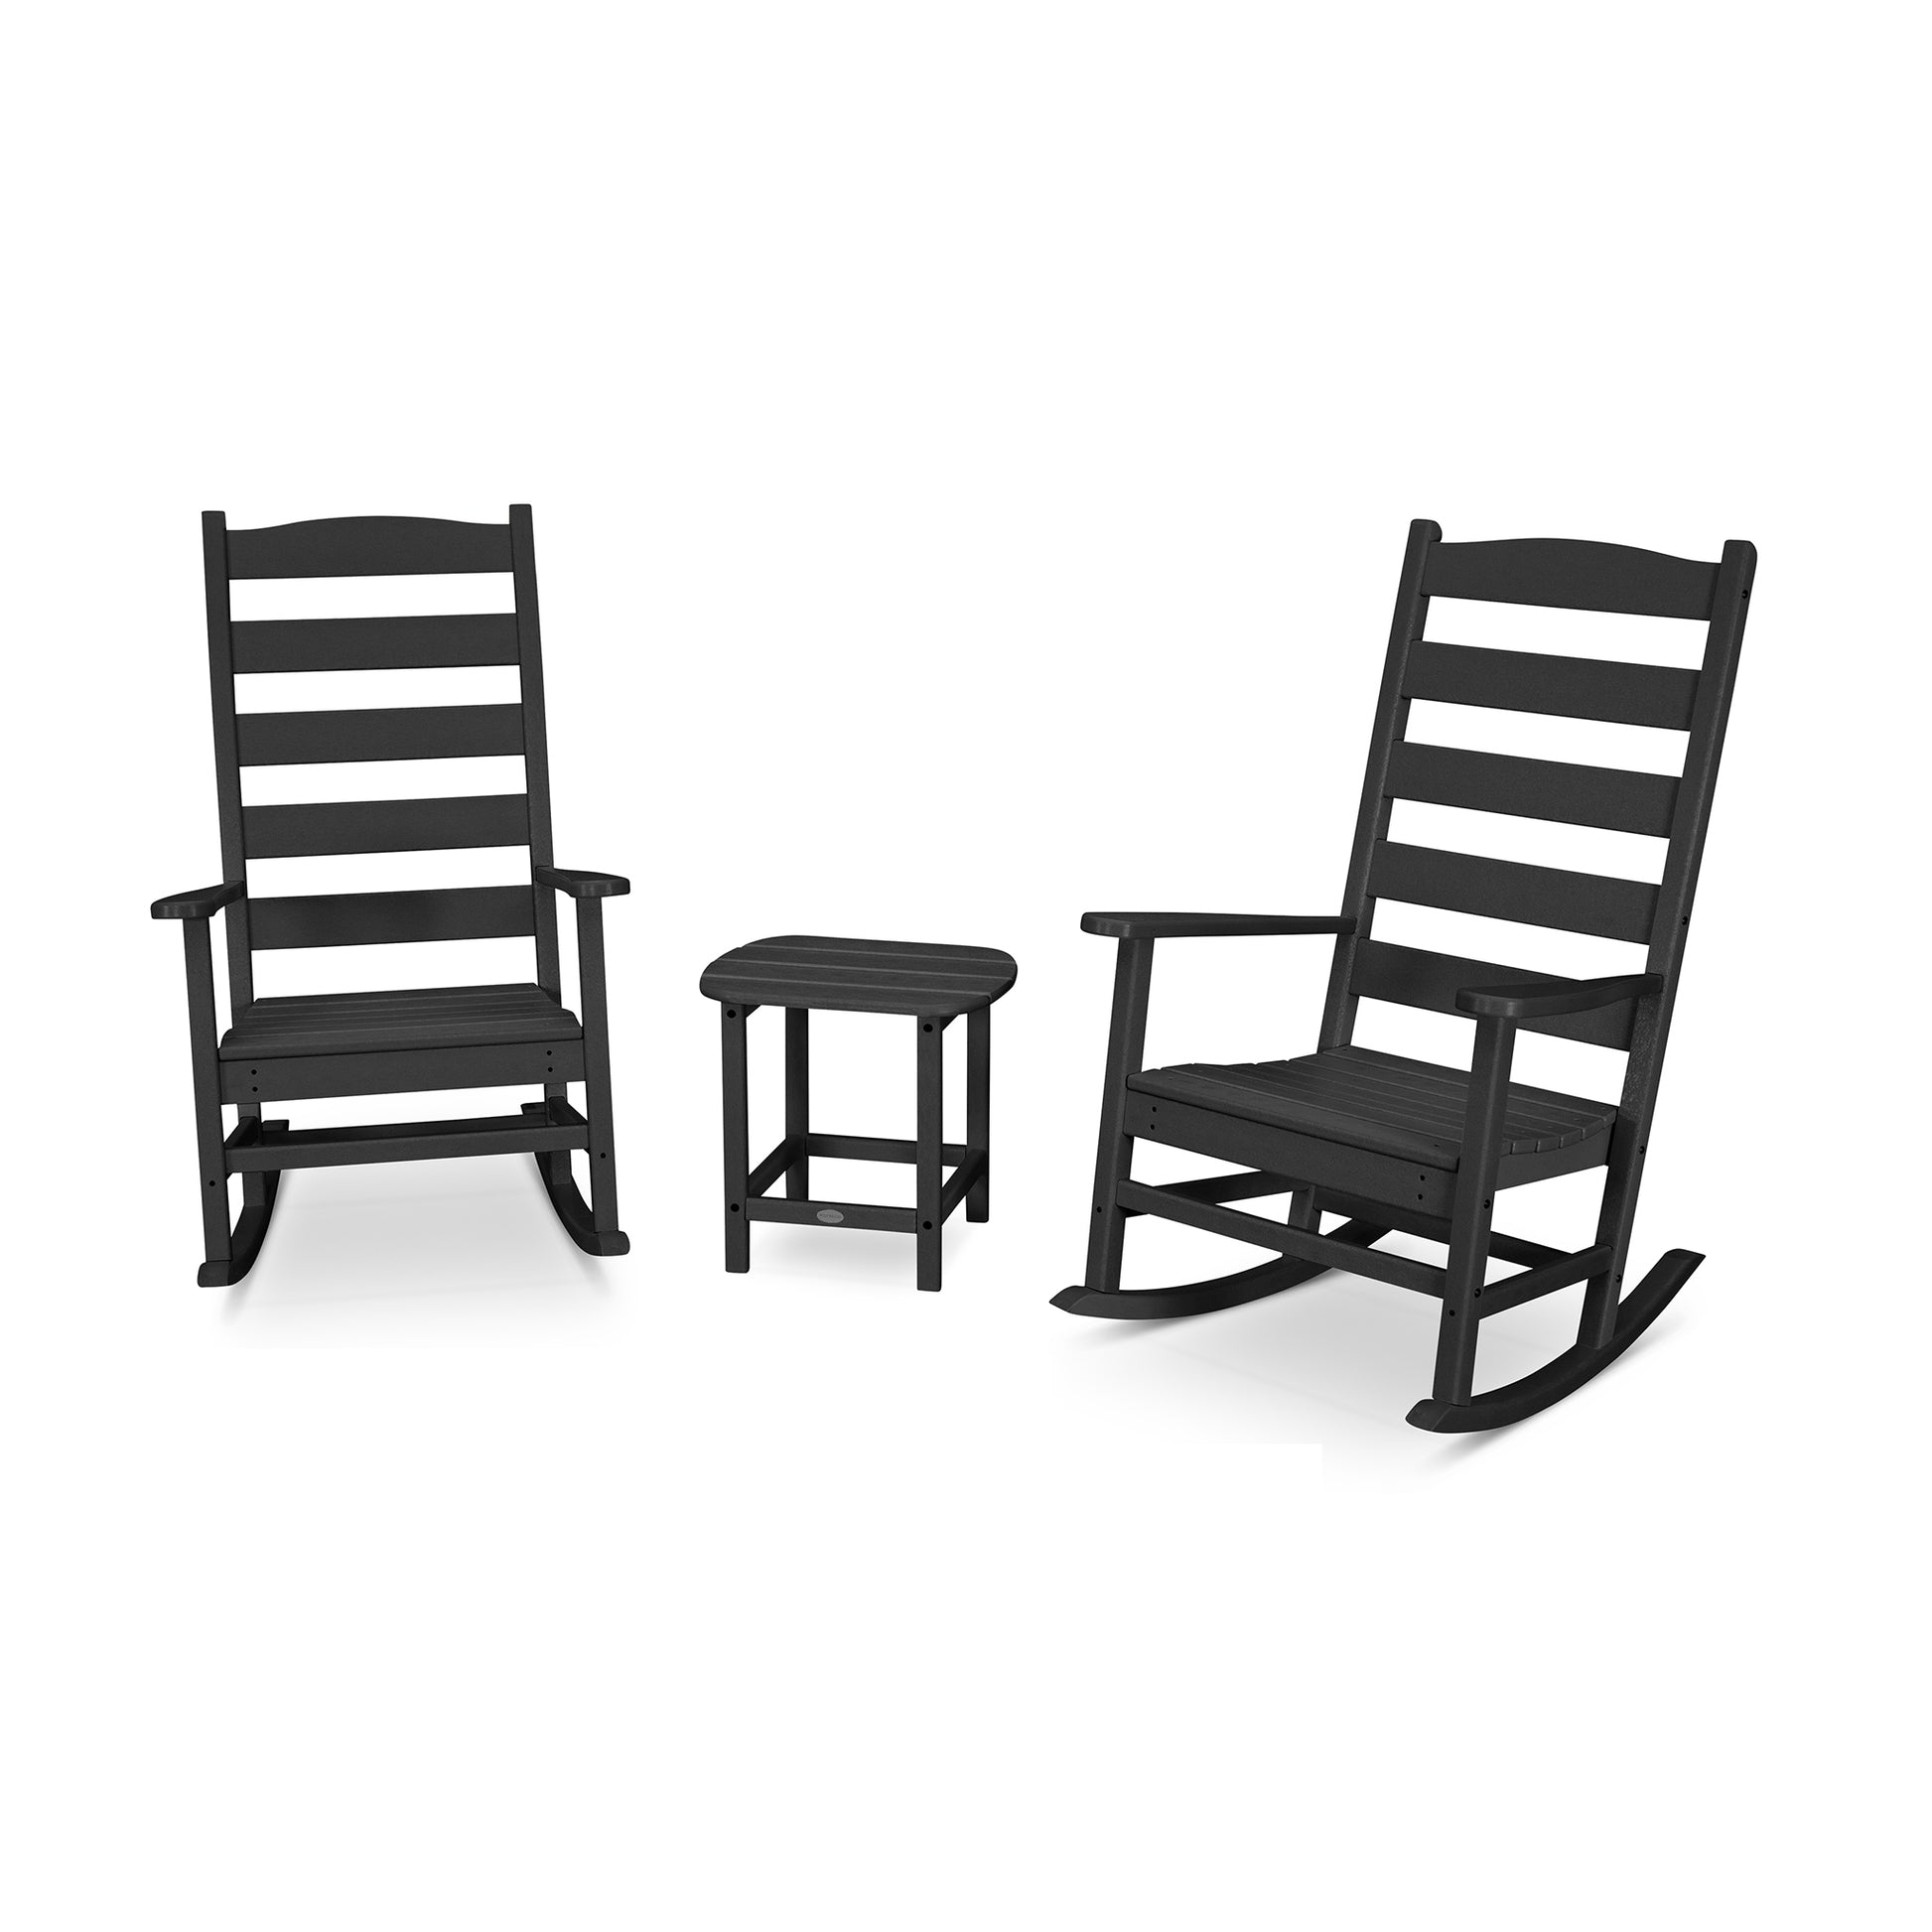 Two black POLYWOOD® Shaker 3-Piece Porch Rocking Chair Sets and a matching small stool set on a plain white background.